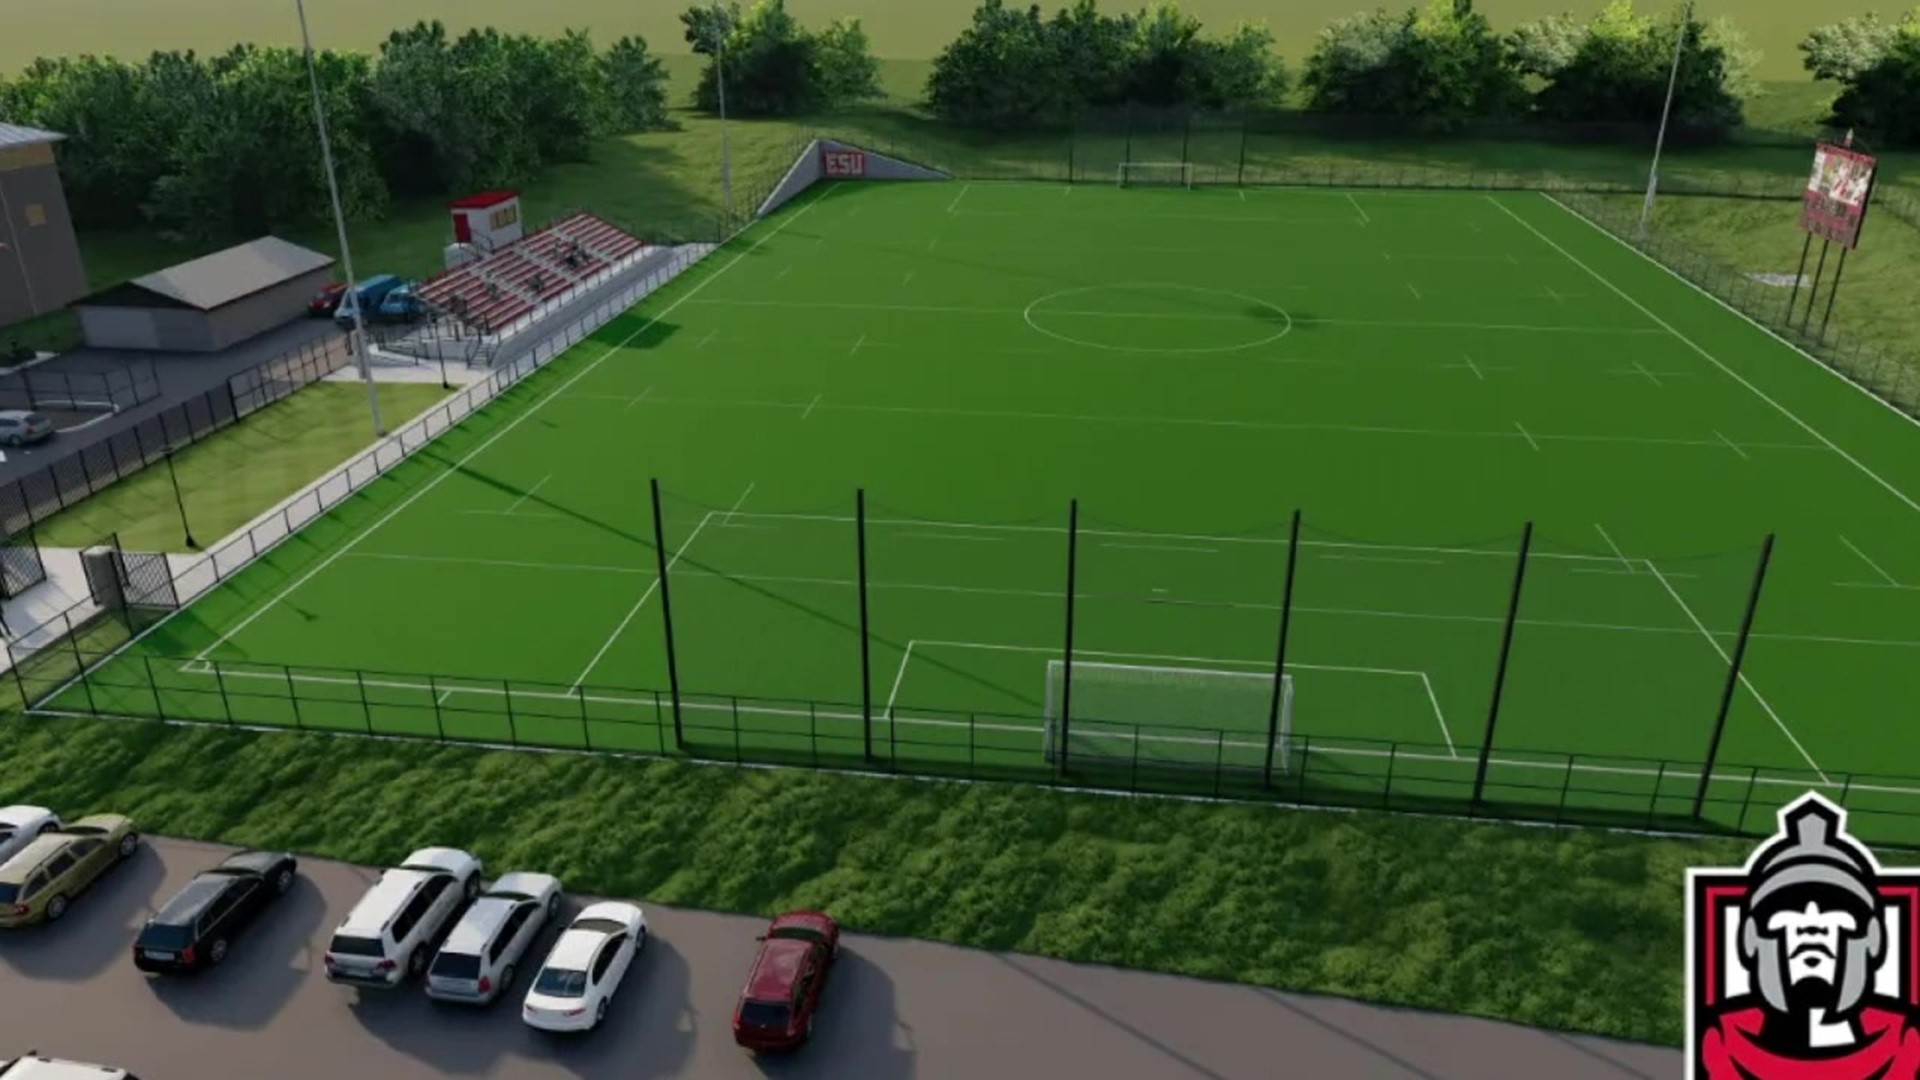 It will feature perimeter fencing, spectator seating, field lighting, a press box, a scoreboard, and a sound system.